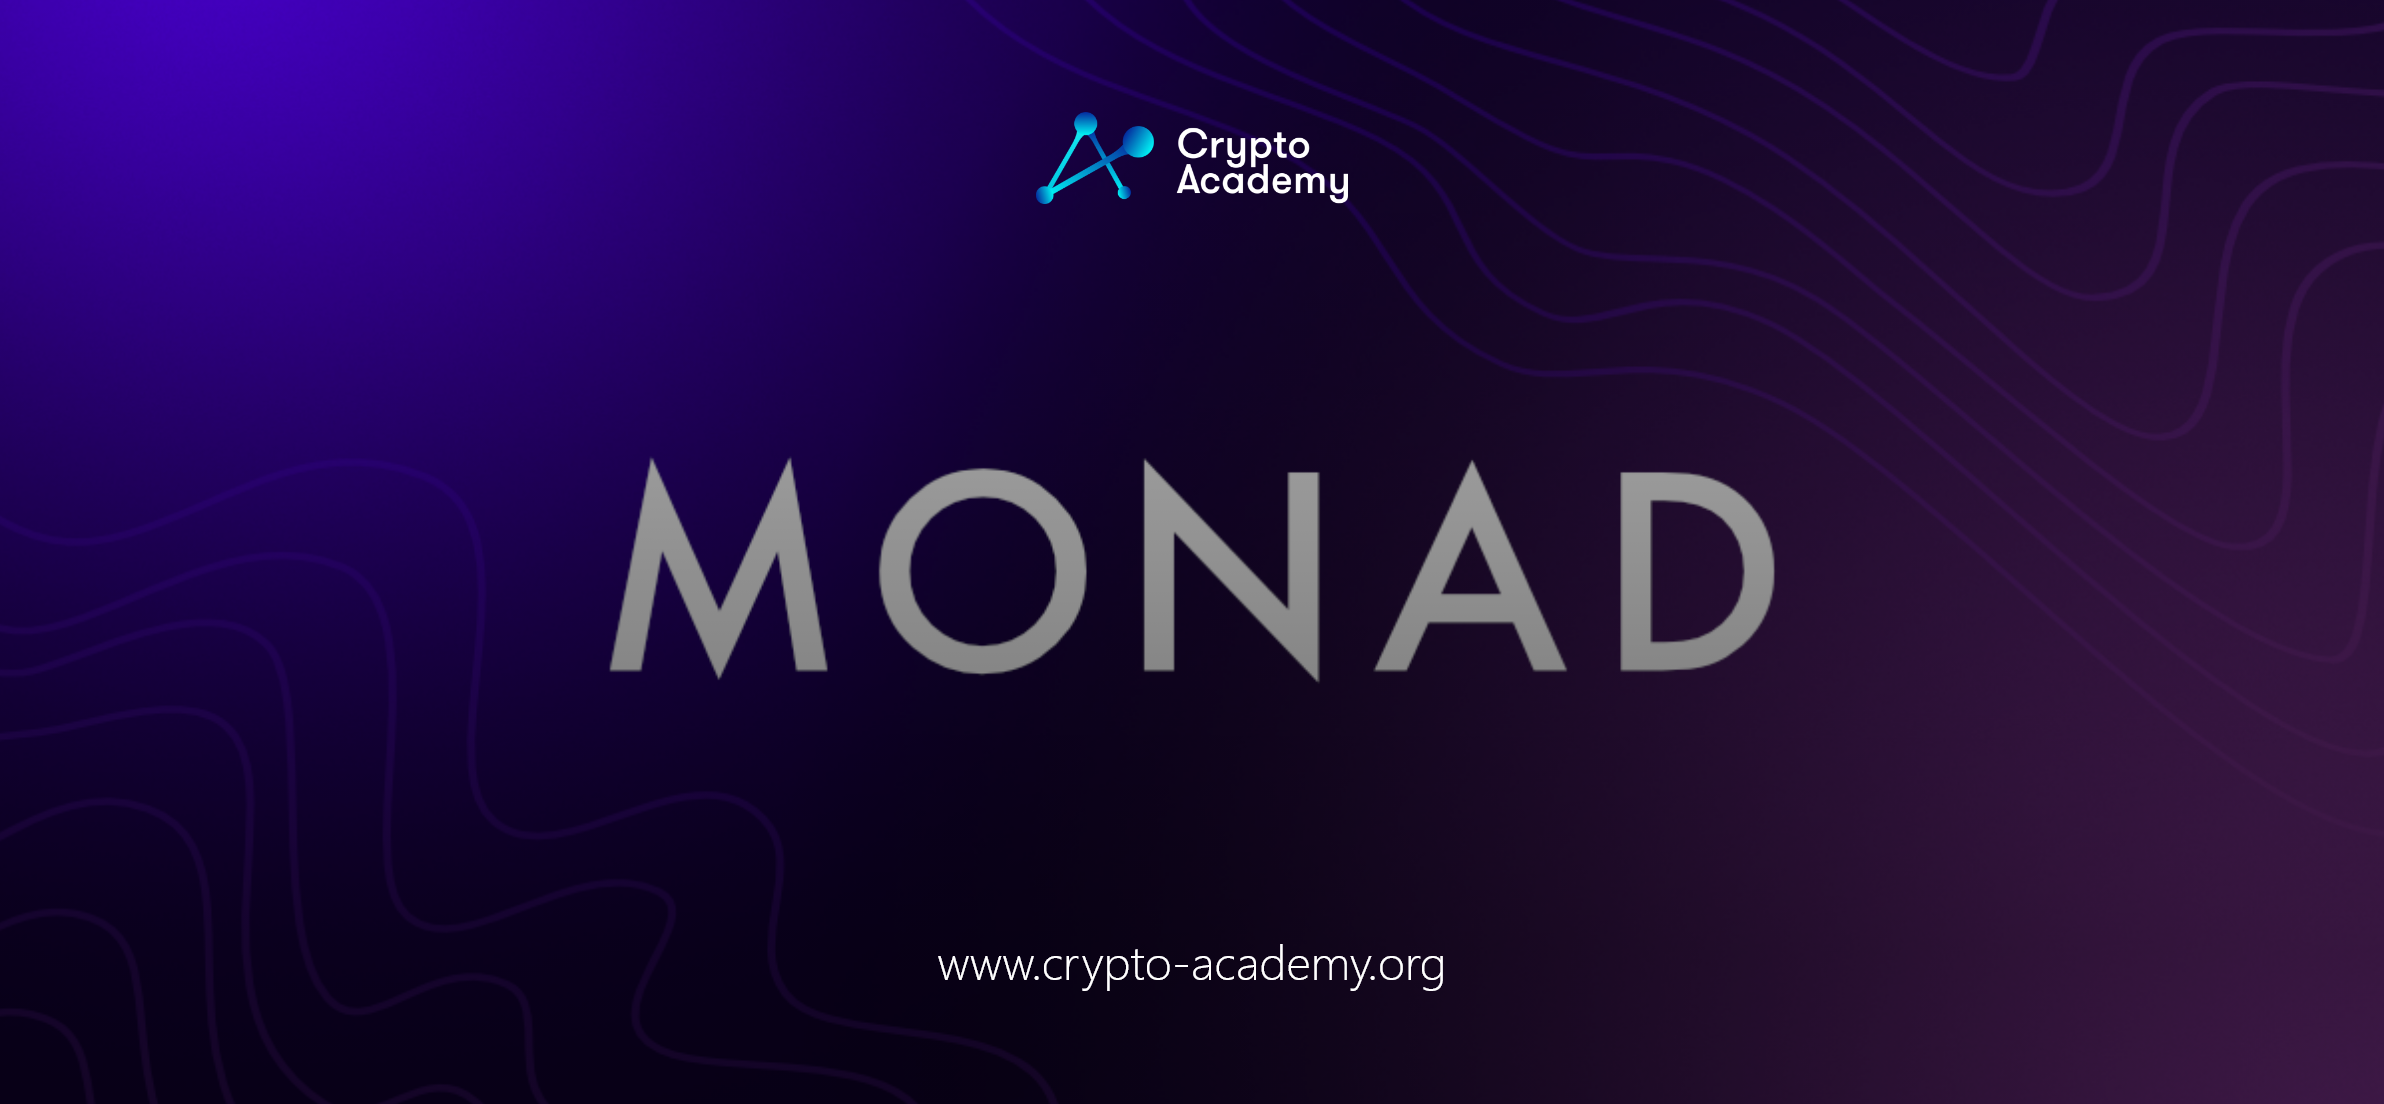 What is Monad? - The Company That Just Raised $225M